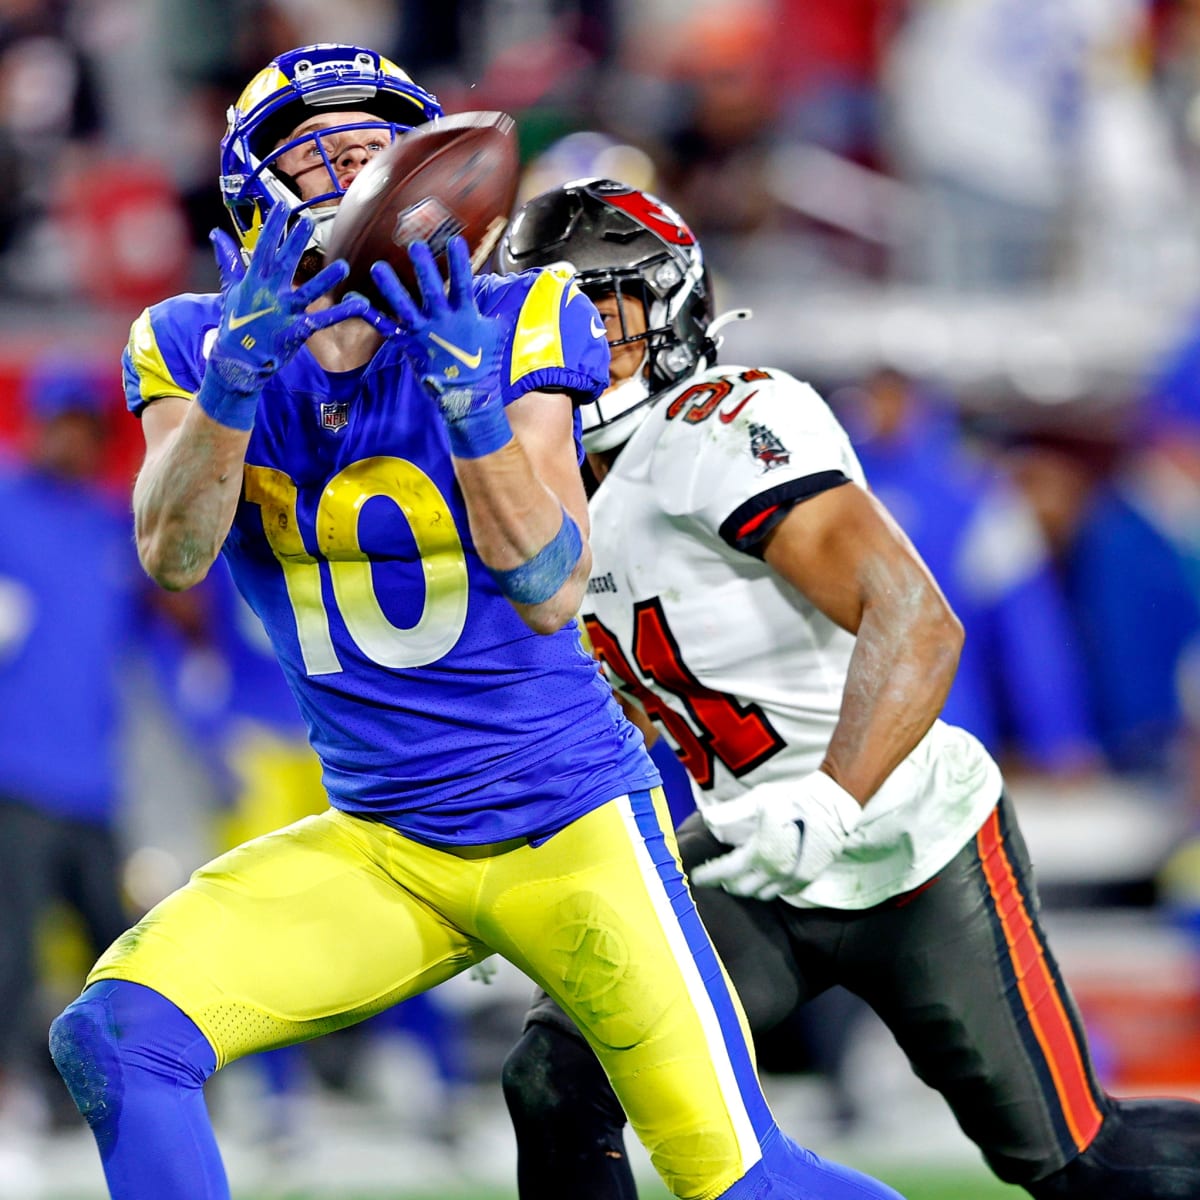 Matthew Stafford's deep ball to Cooper Kupp sends Rams to NFC title game  (video) - Sports Illustrated